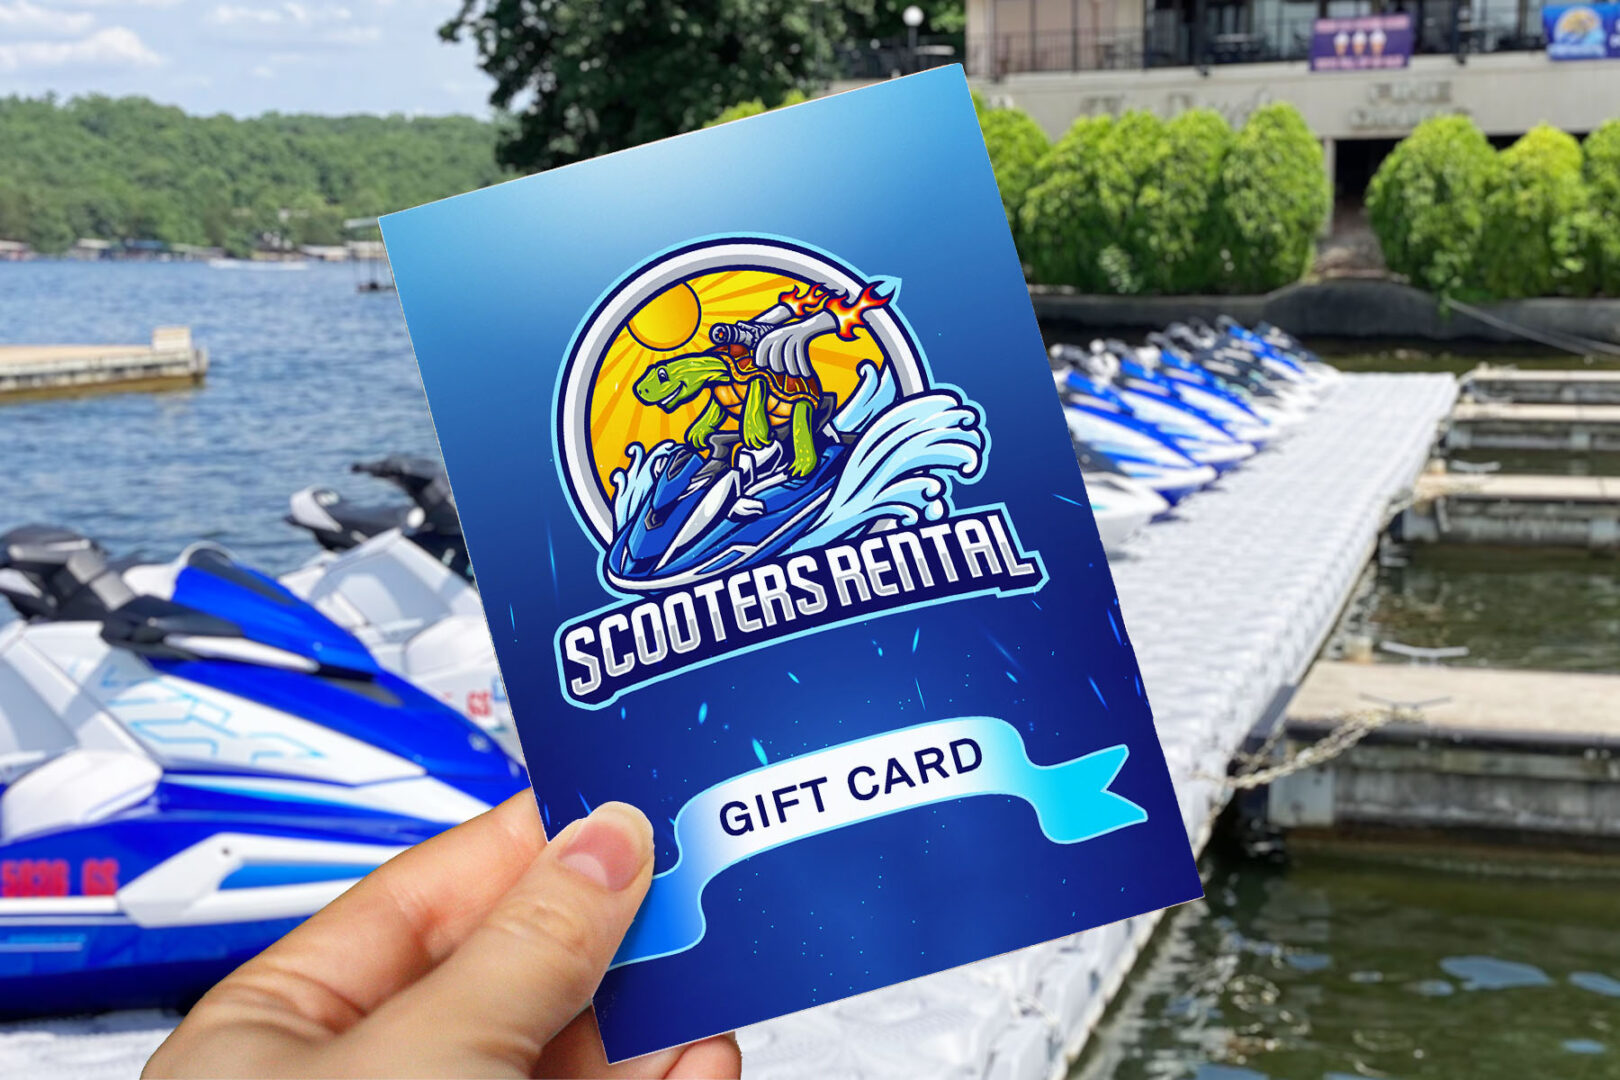 Scooters rental gift card